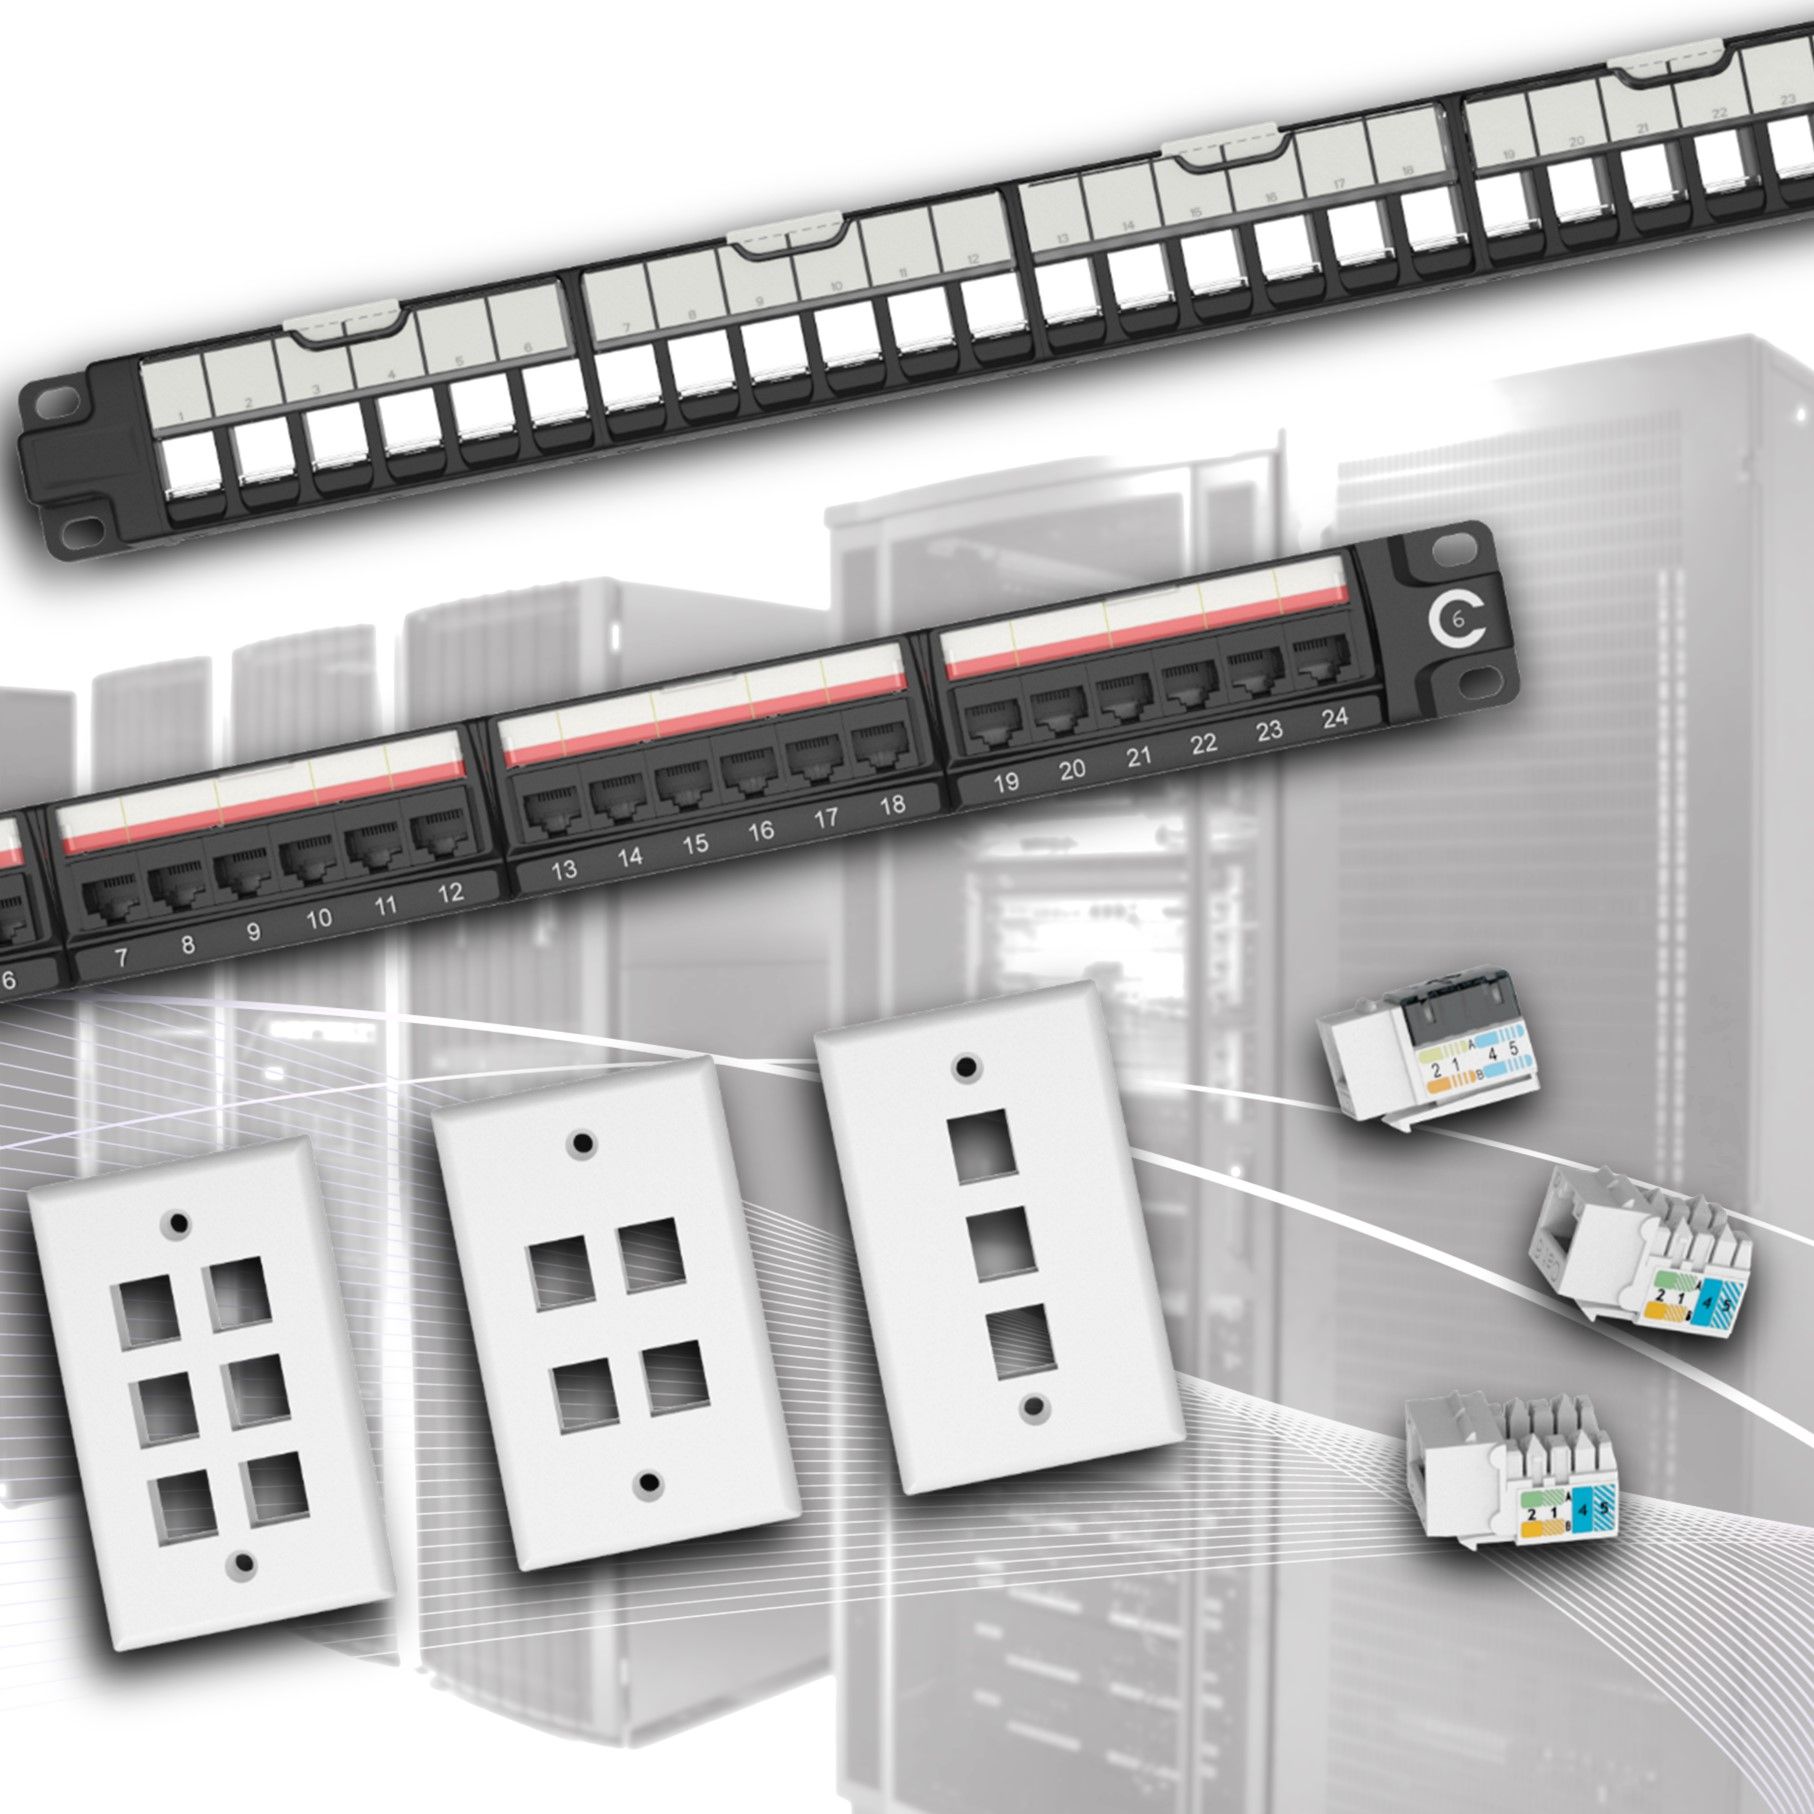 Keystone Jack and patch panel can be used in data commercial building